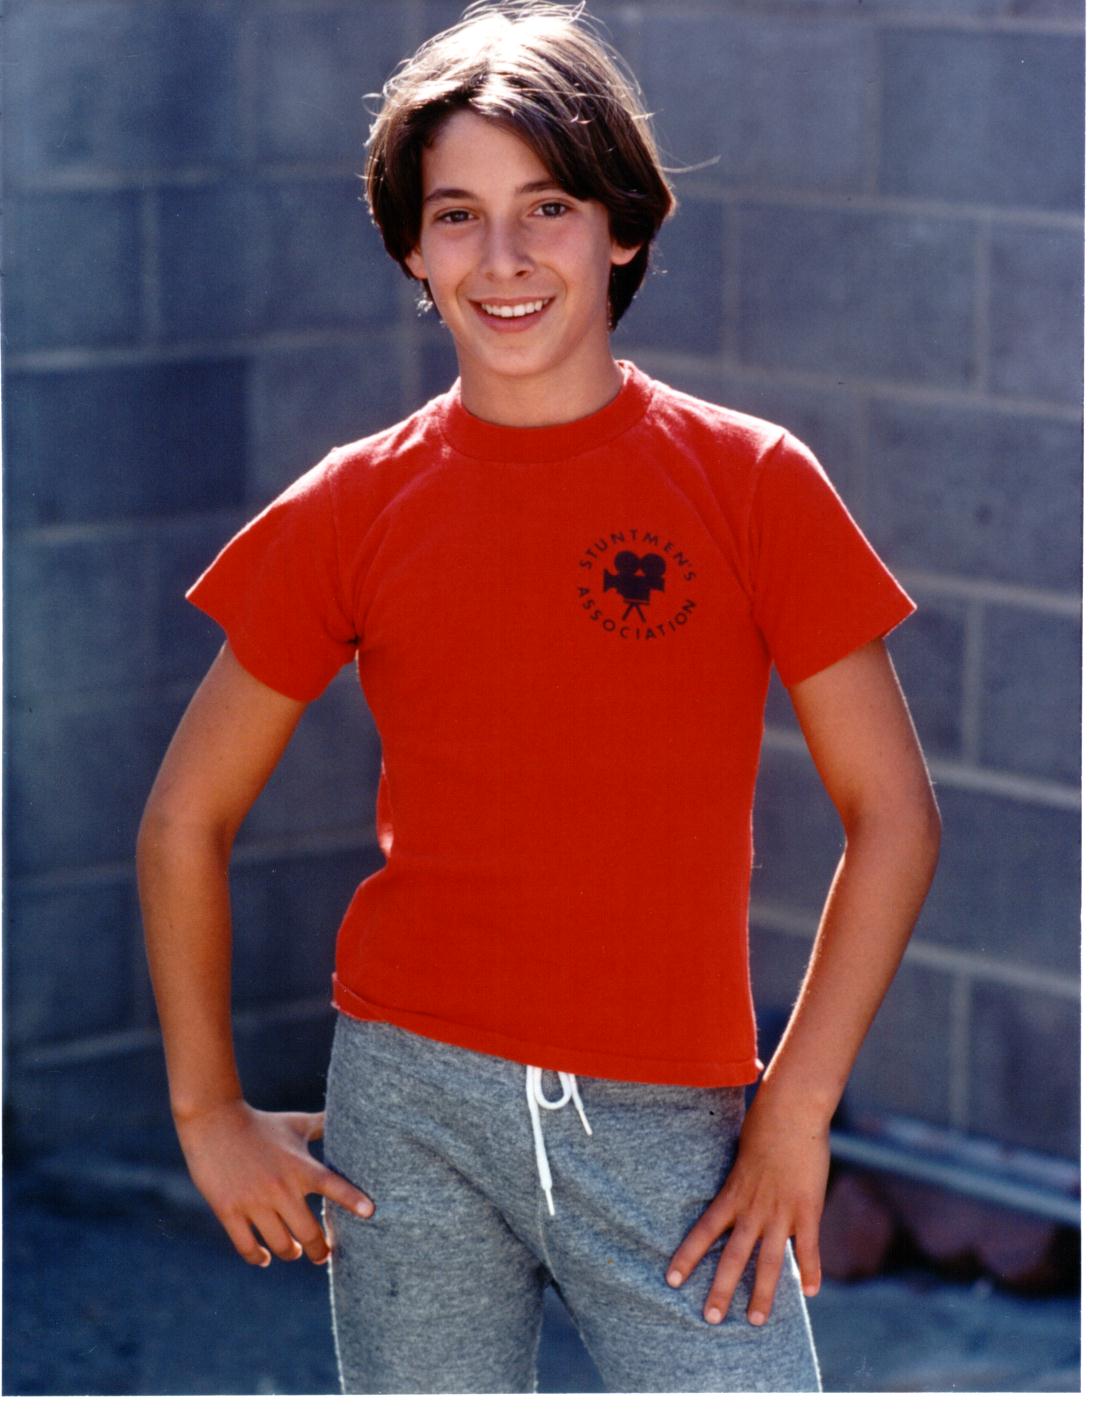 Picture Of Noah Hathaway In General Pictures Noah035 Teen Idols 4 You 6063